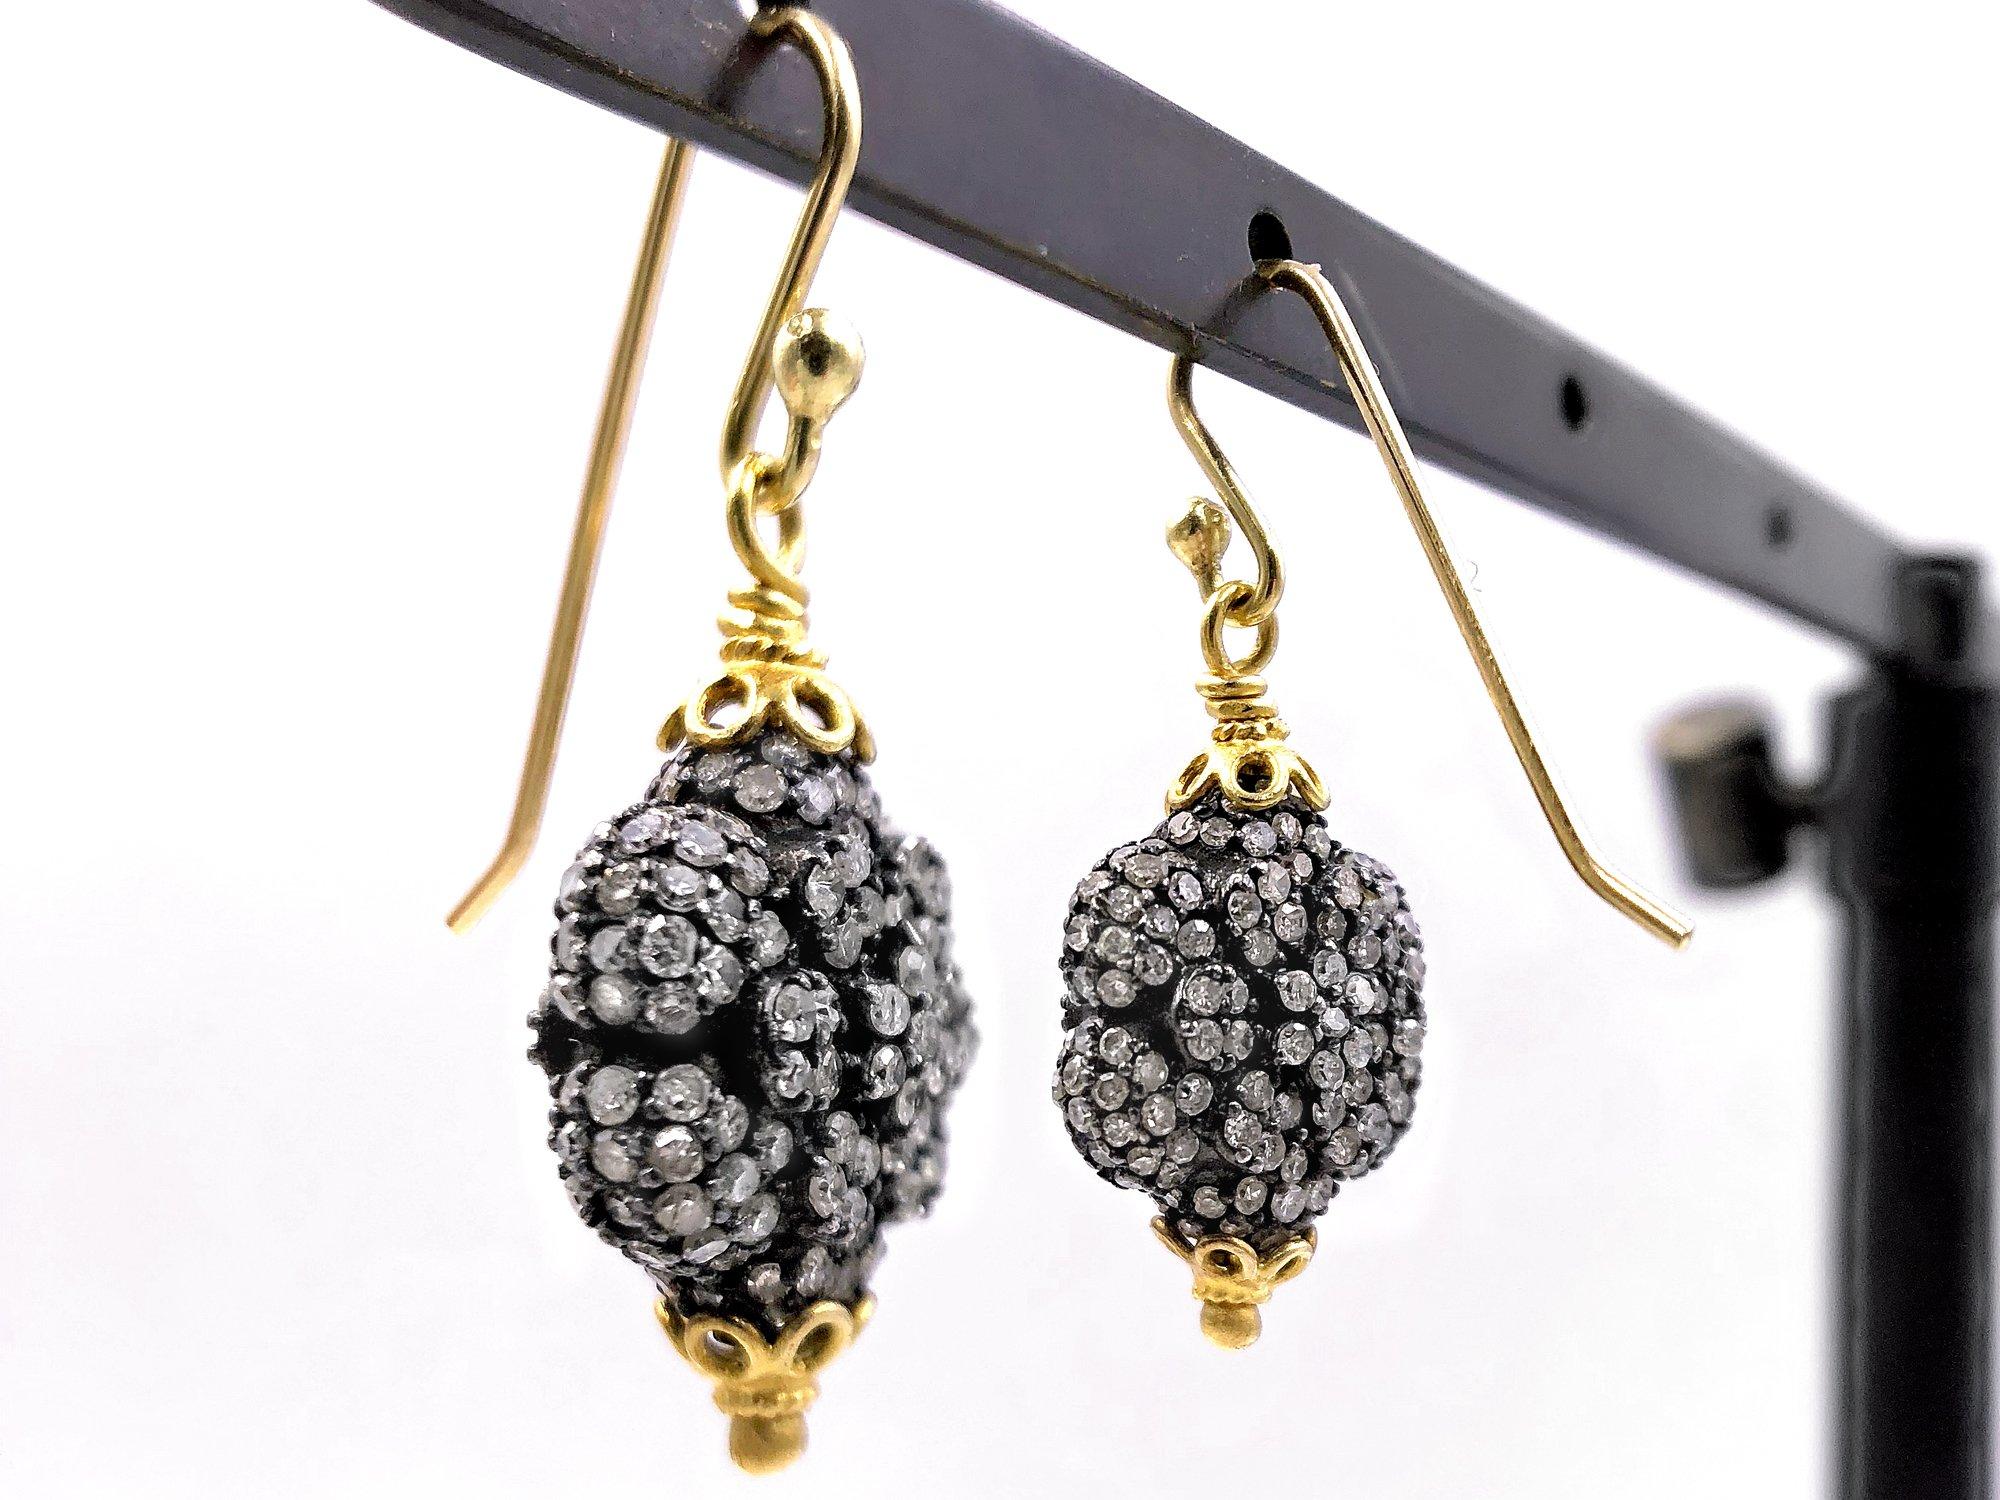 Drop Earrings handmade by jewelry designer Fern Freeman featuring shimmering round diamonds set on double-sided black rhodium-finished sterling silver elements wrapped in 22k yellow gold accenting. 